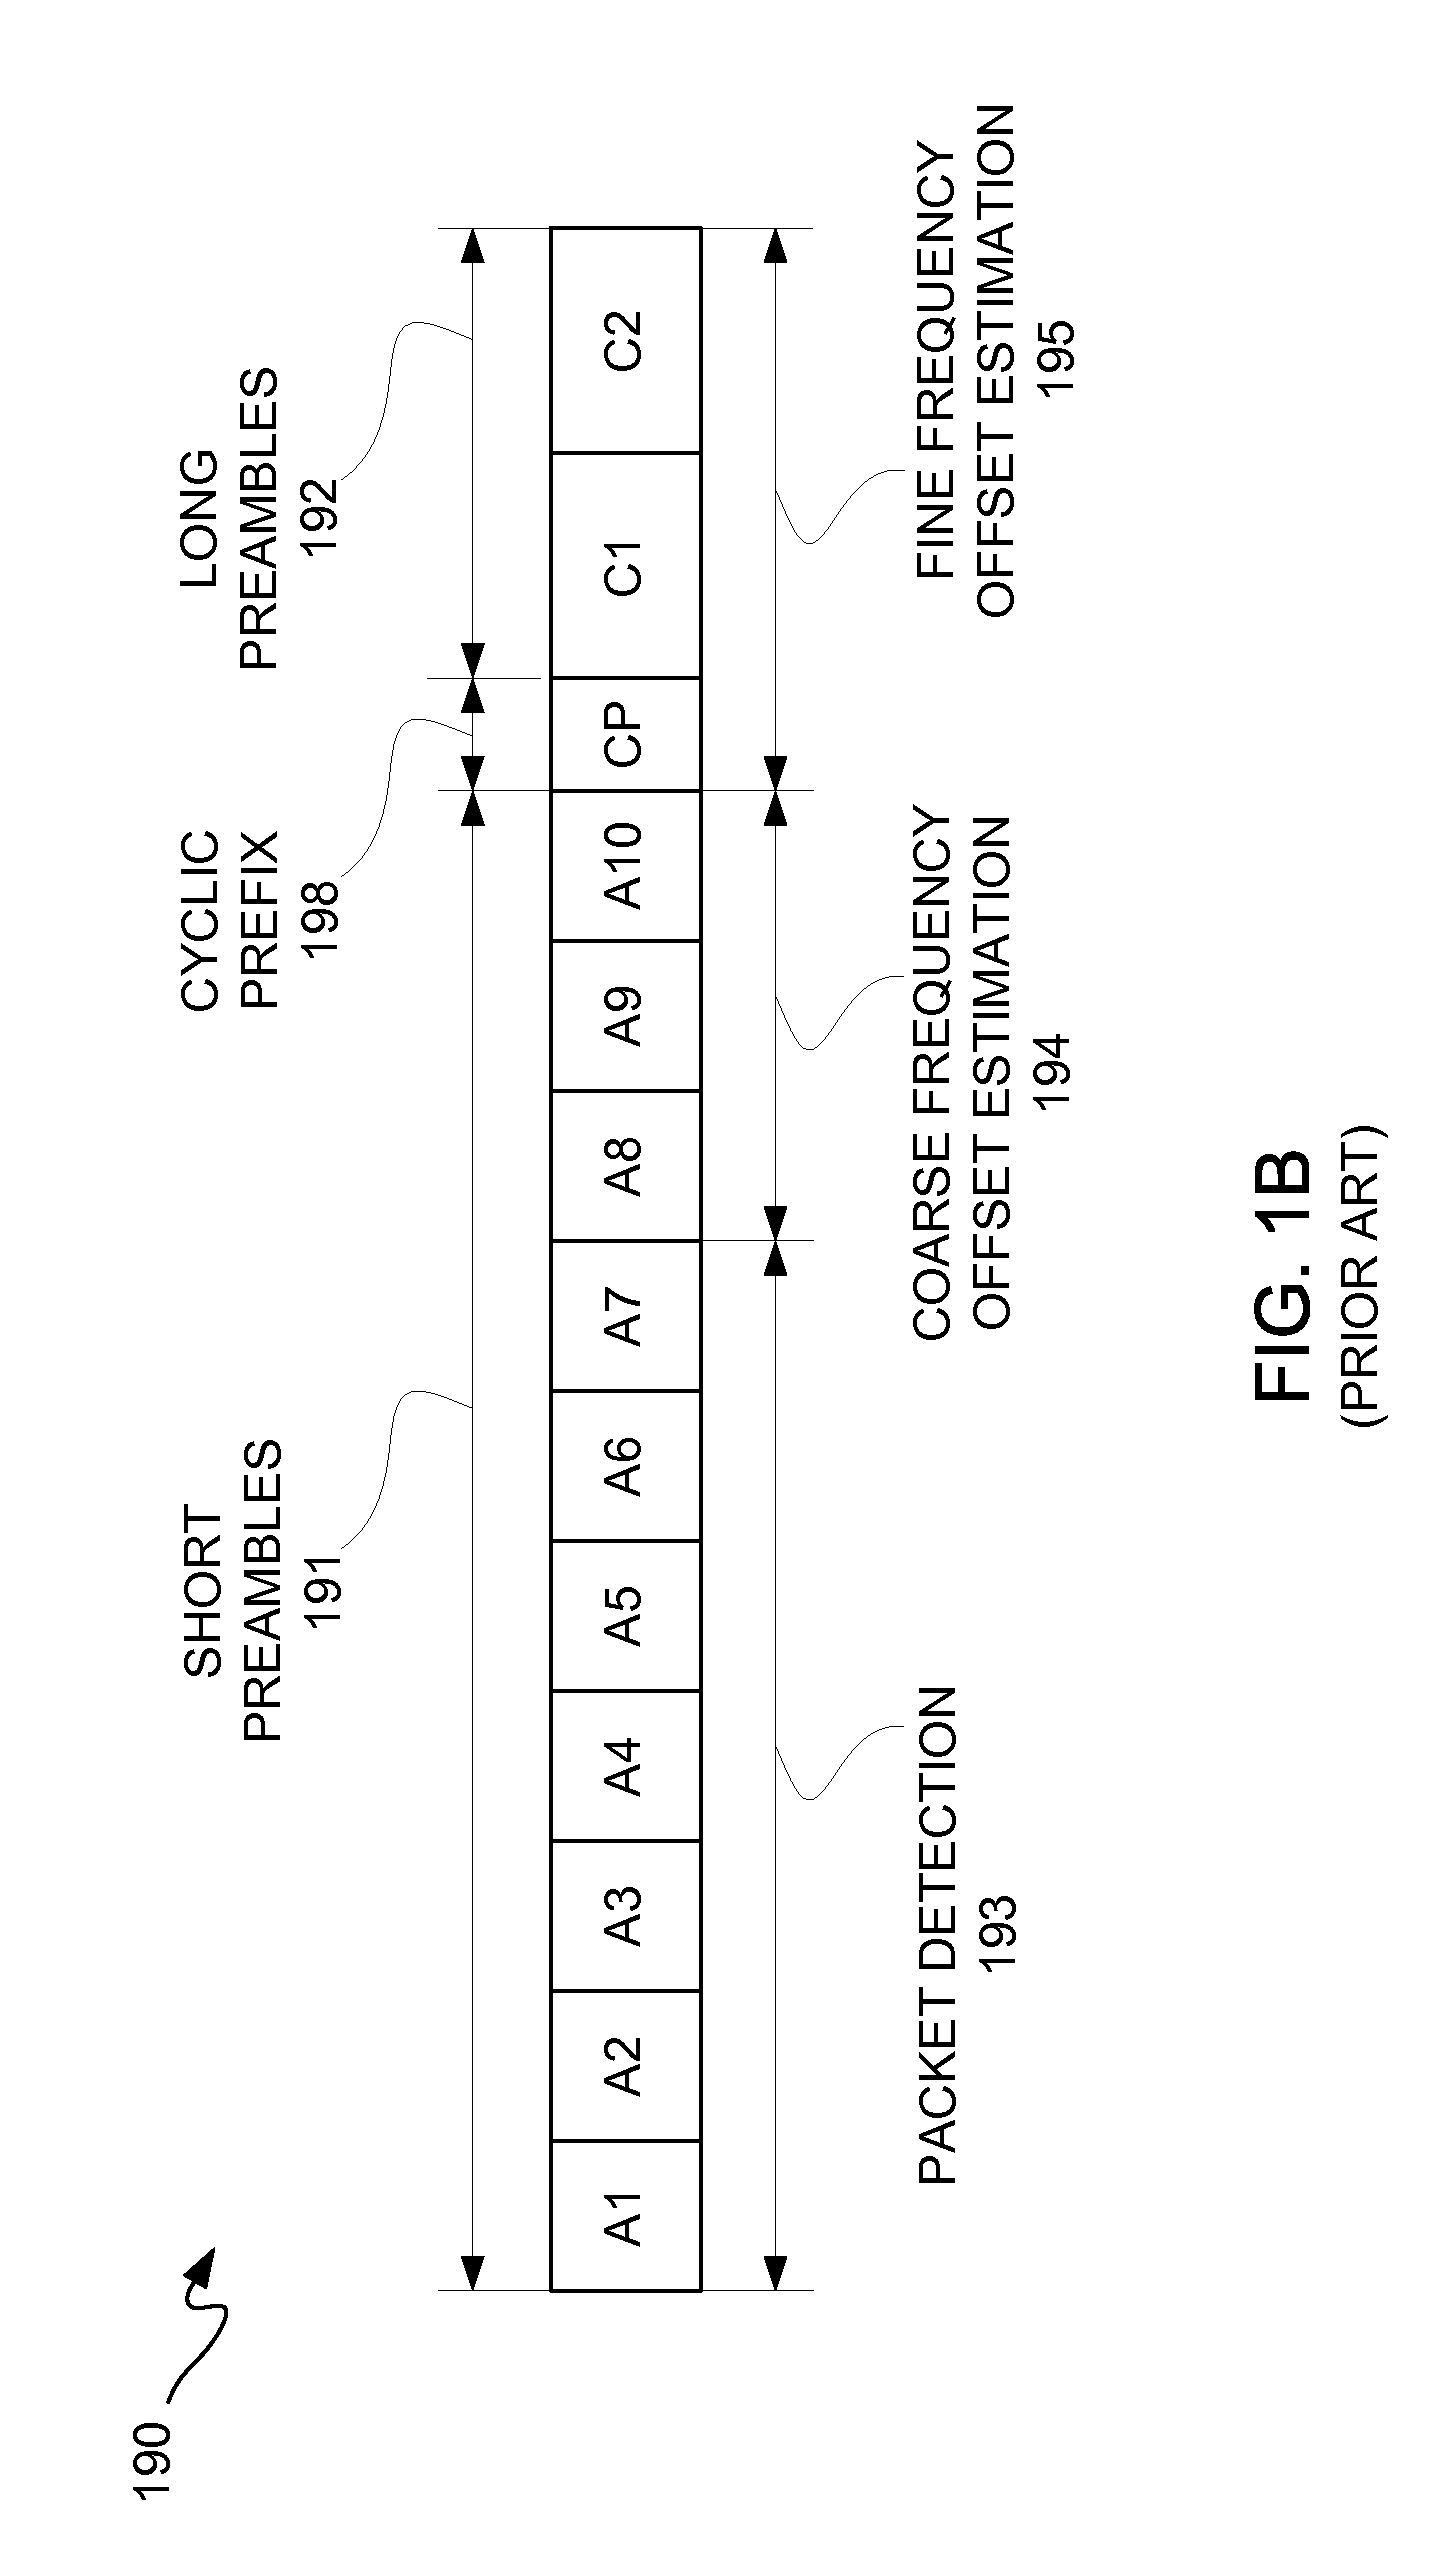 Block boundary detection for a wireless communication system